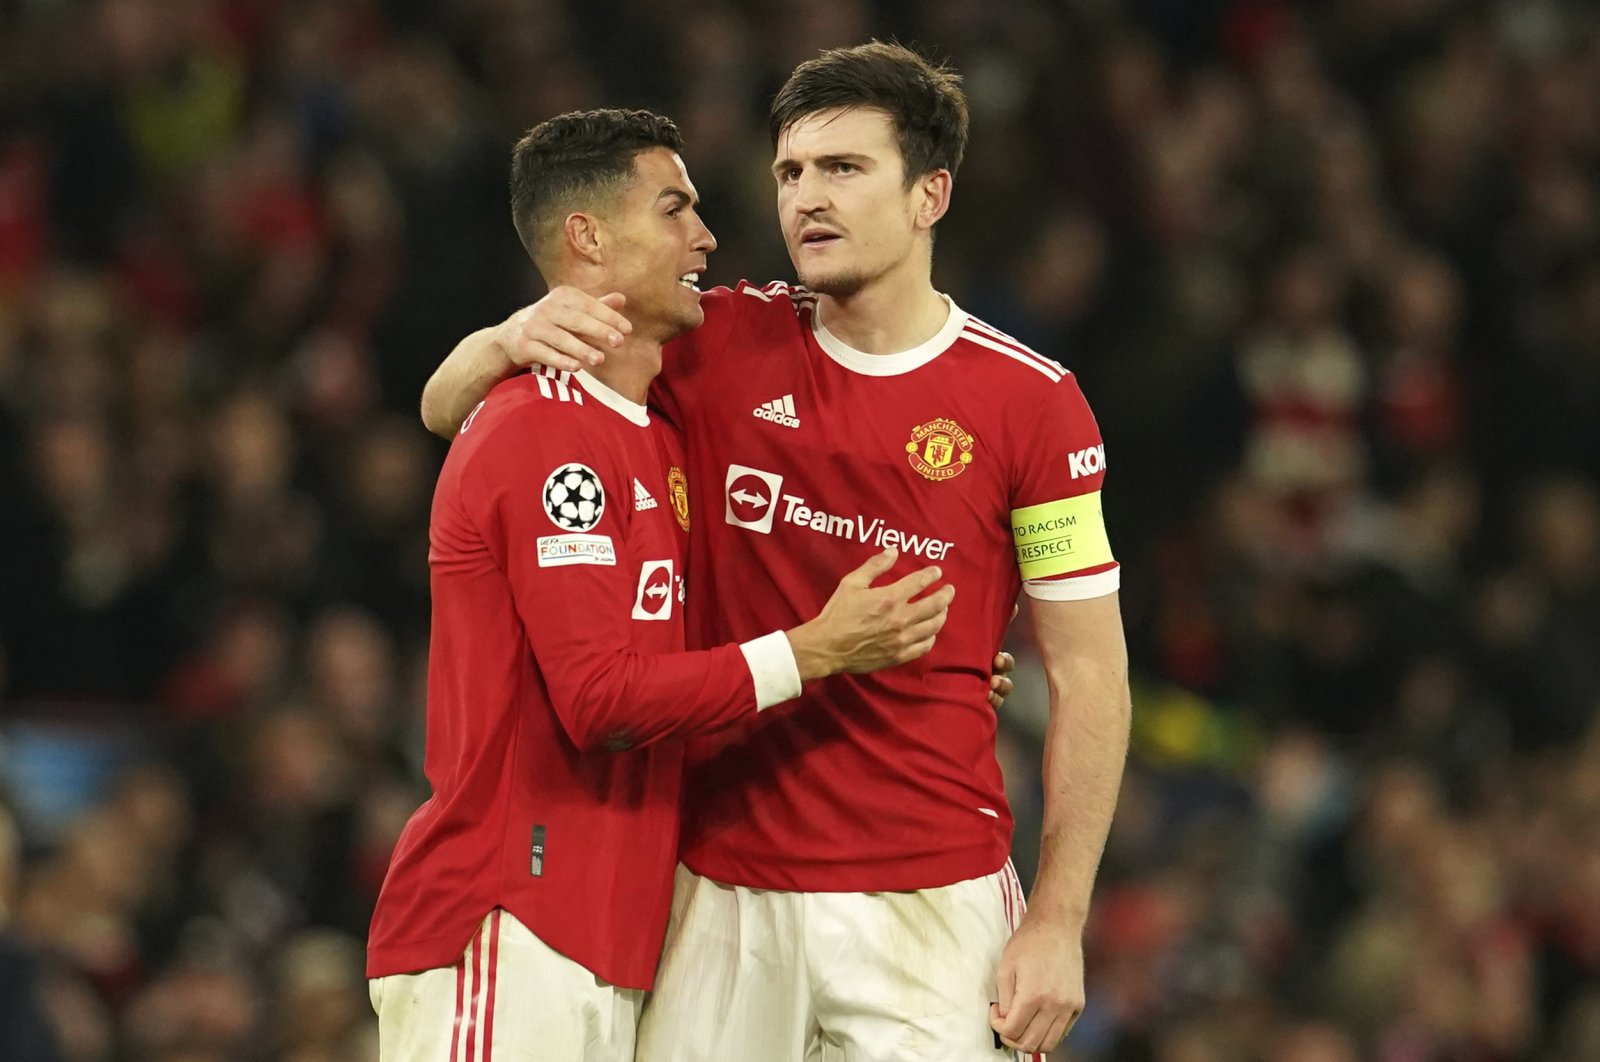 Man Utd&#039;s Cristiano Ronaldo (L) and Harry Maguire after a Champions League match, Manchester, England, Oct. 20, 2021. (AP Photo)